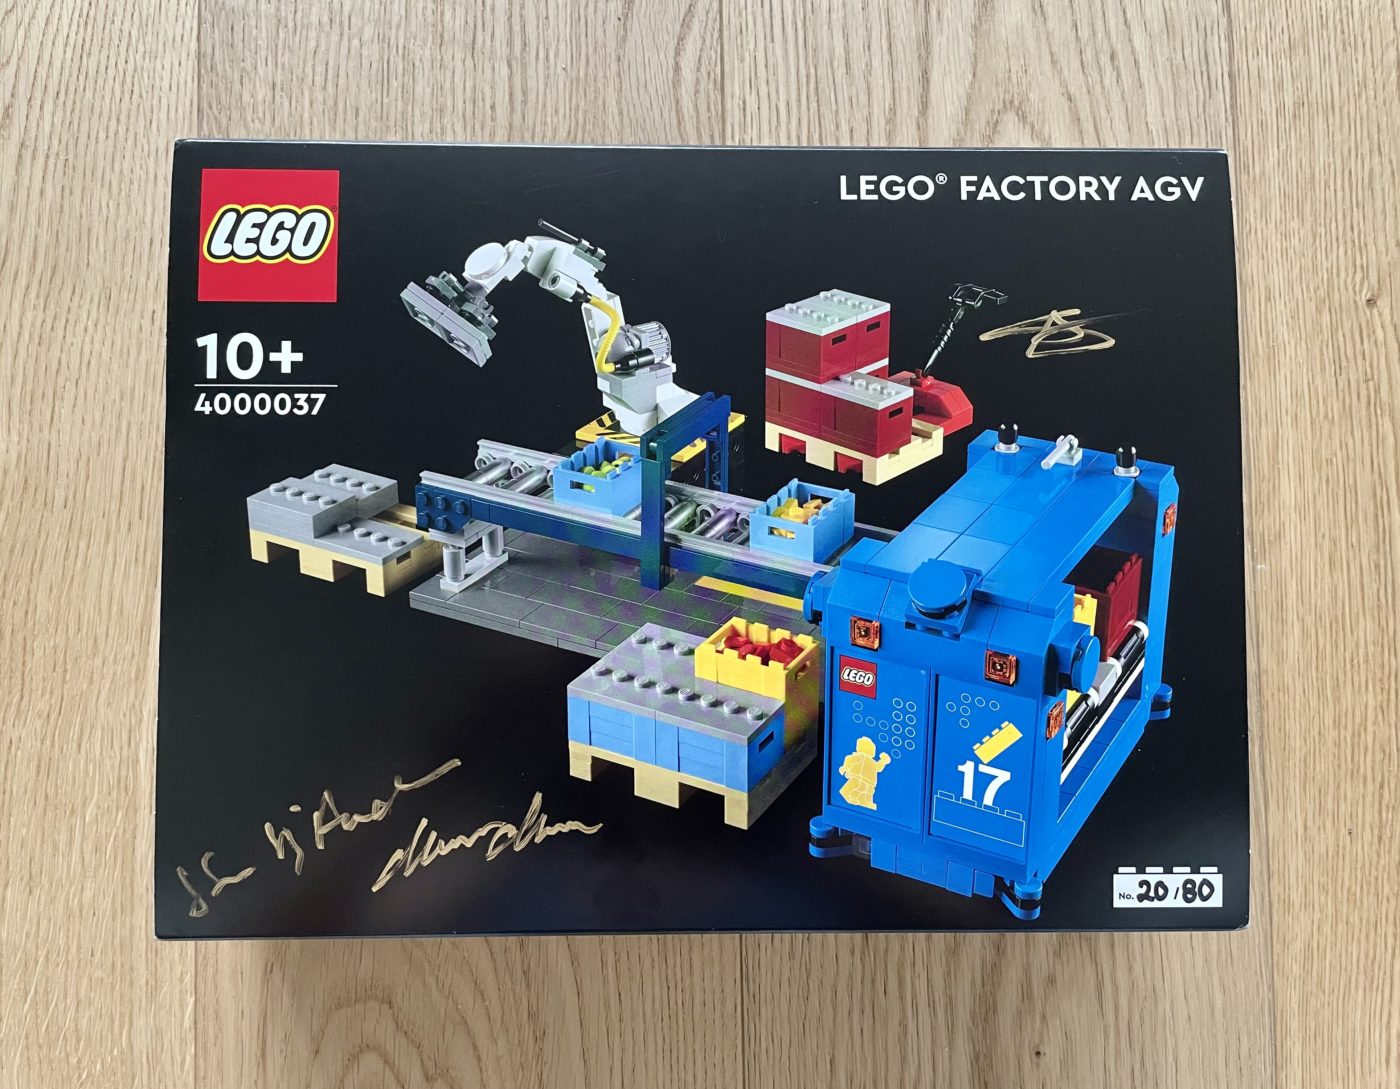 Exclusive look at the 2022 LEGO Inside Tour set - 4000037 LEGO Factory AGV  - Jay's Brick Blog